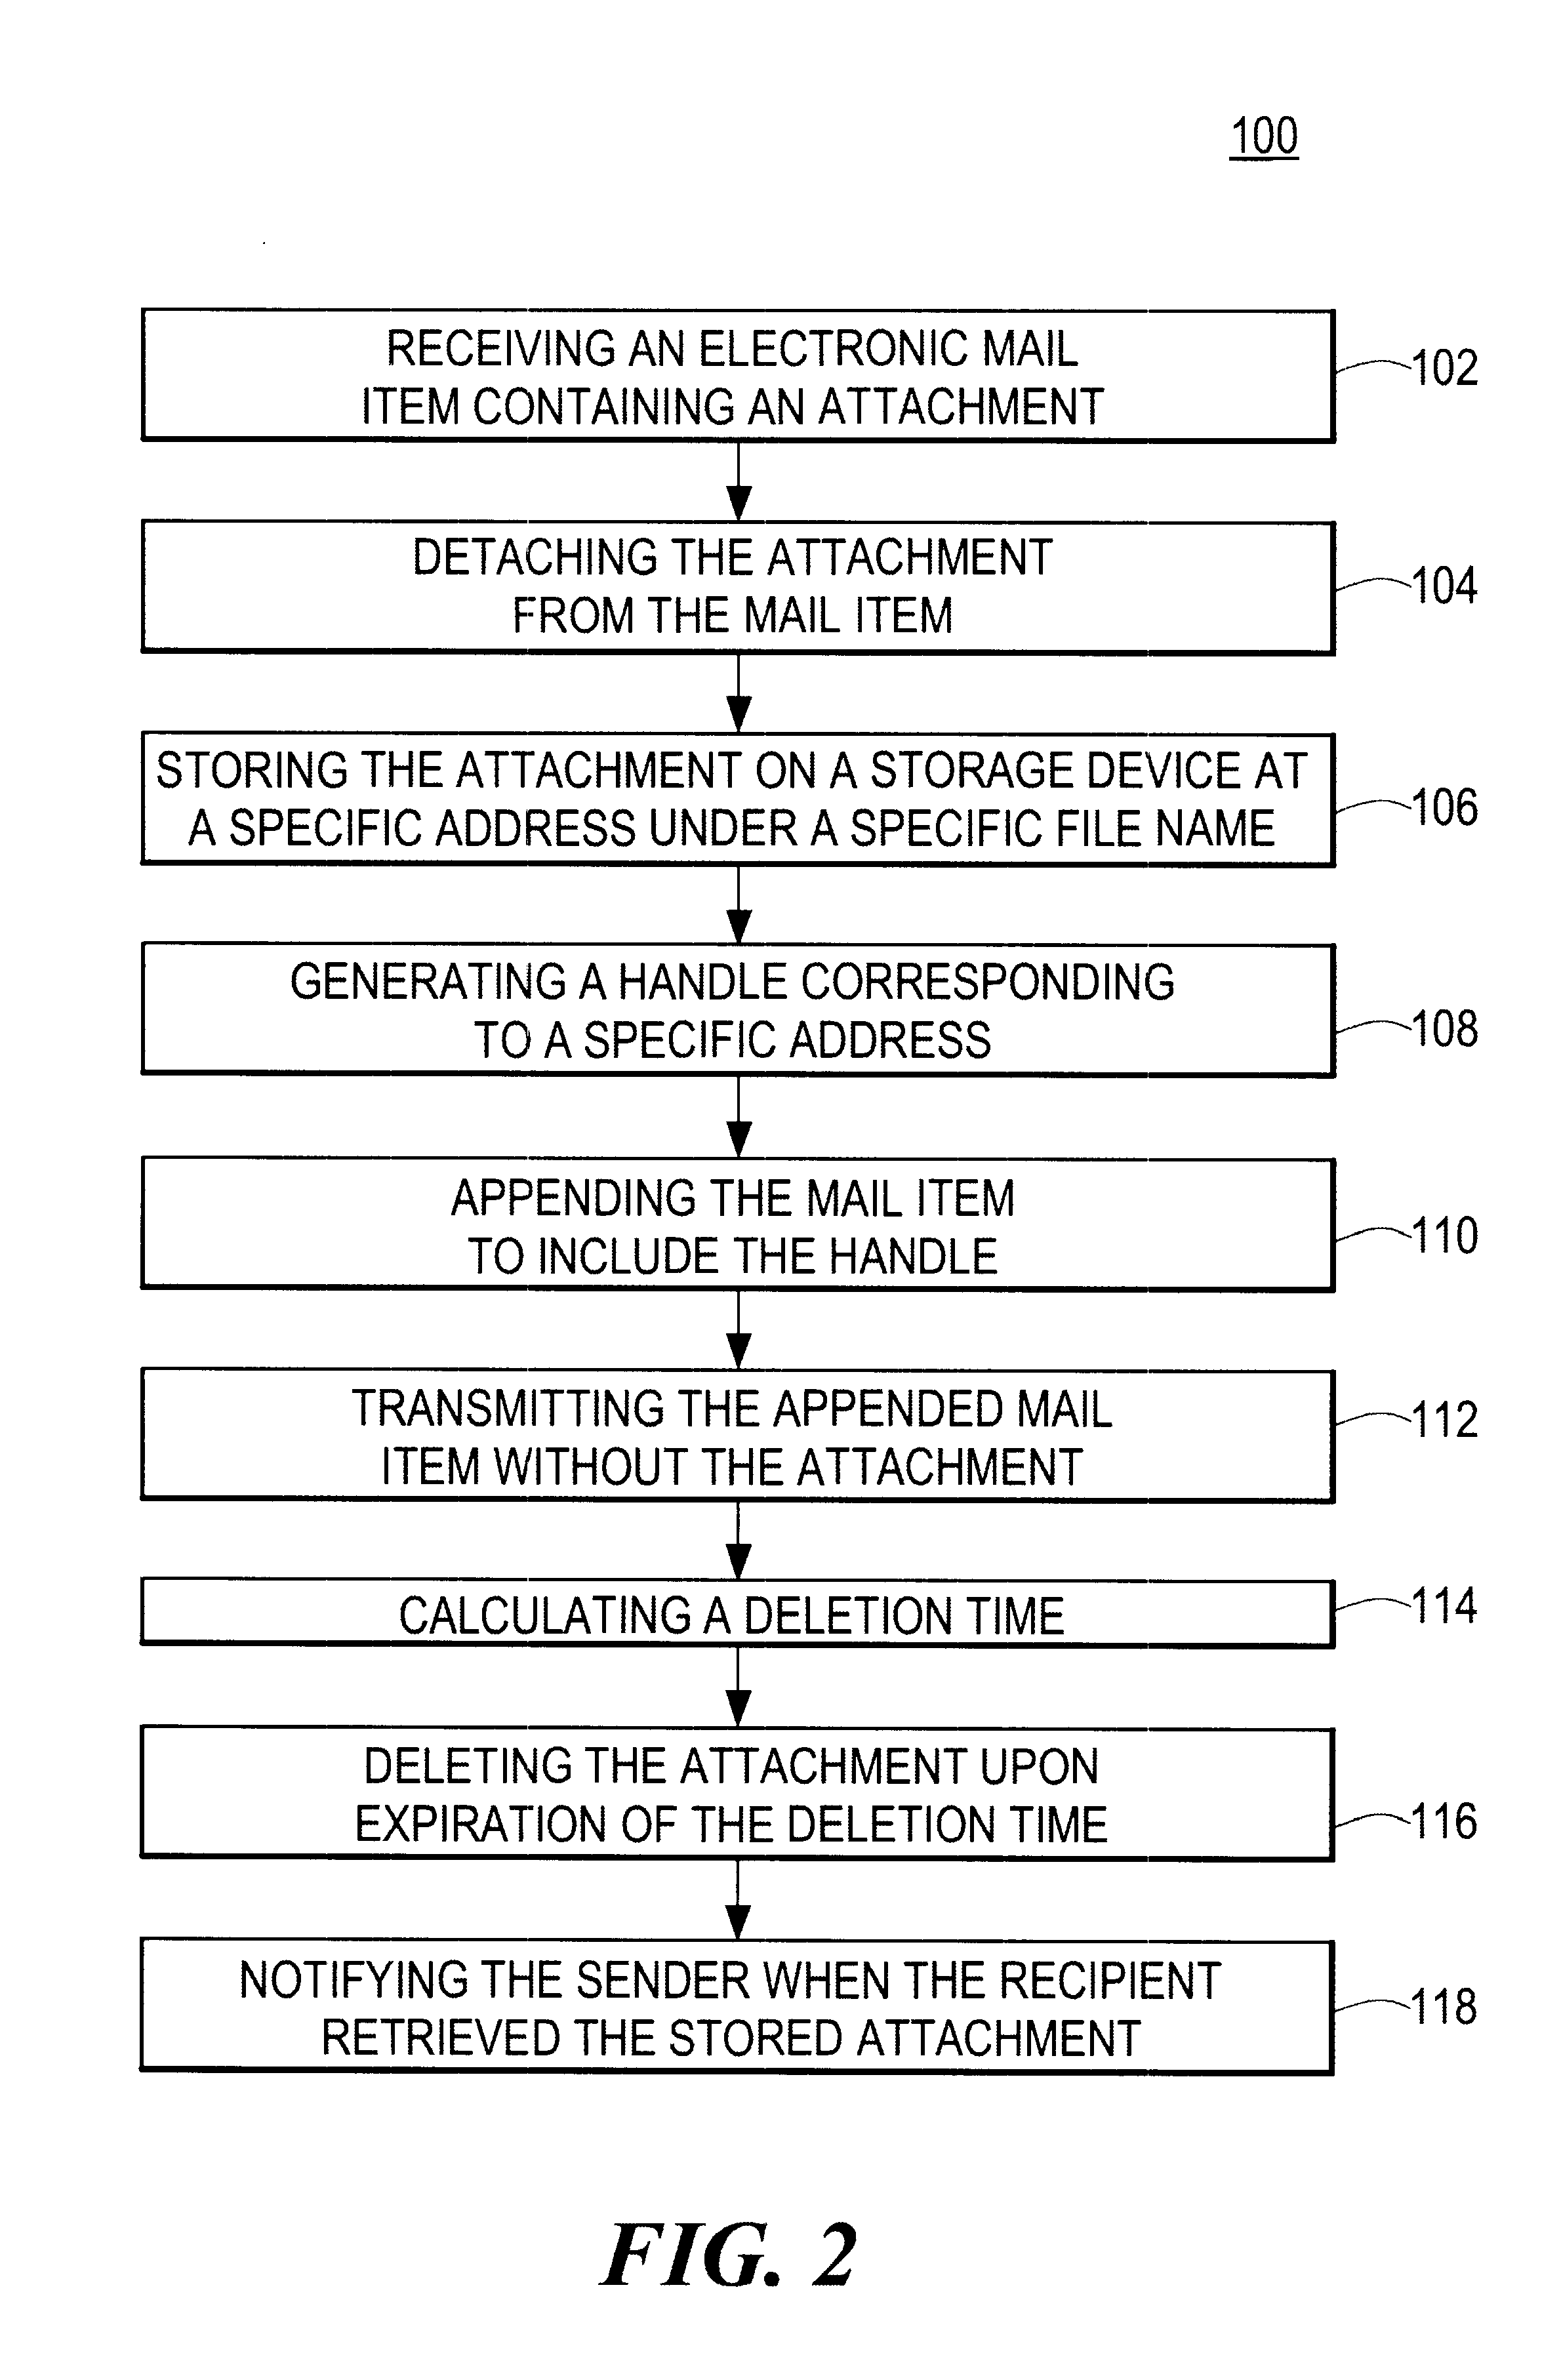 Network-based mail attachment storage system and method